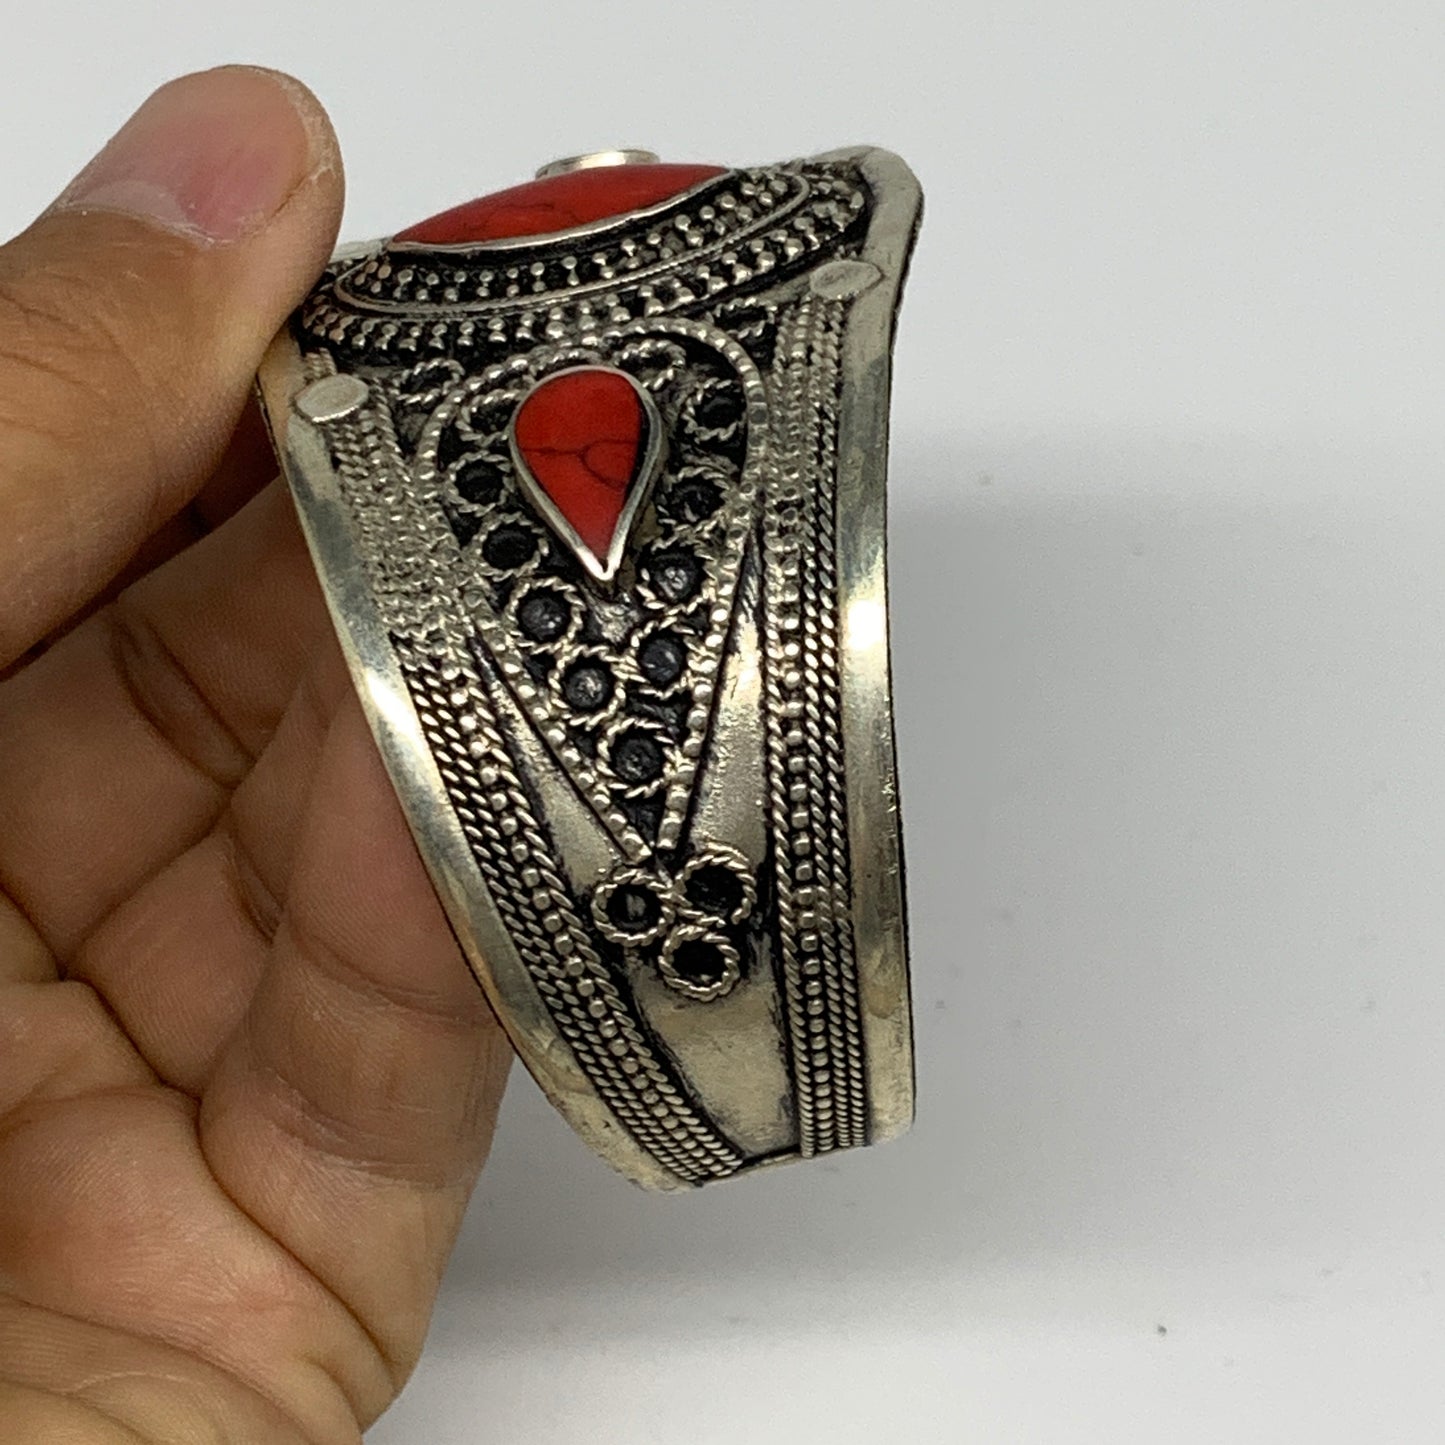 34.4g, 1.6" Turkmen Cuff Bracelet Tribal Small Marquise, Red Coral Inlay, B13504